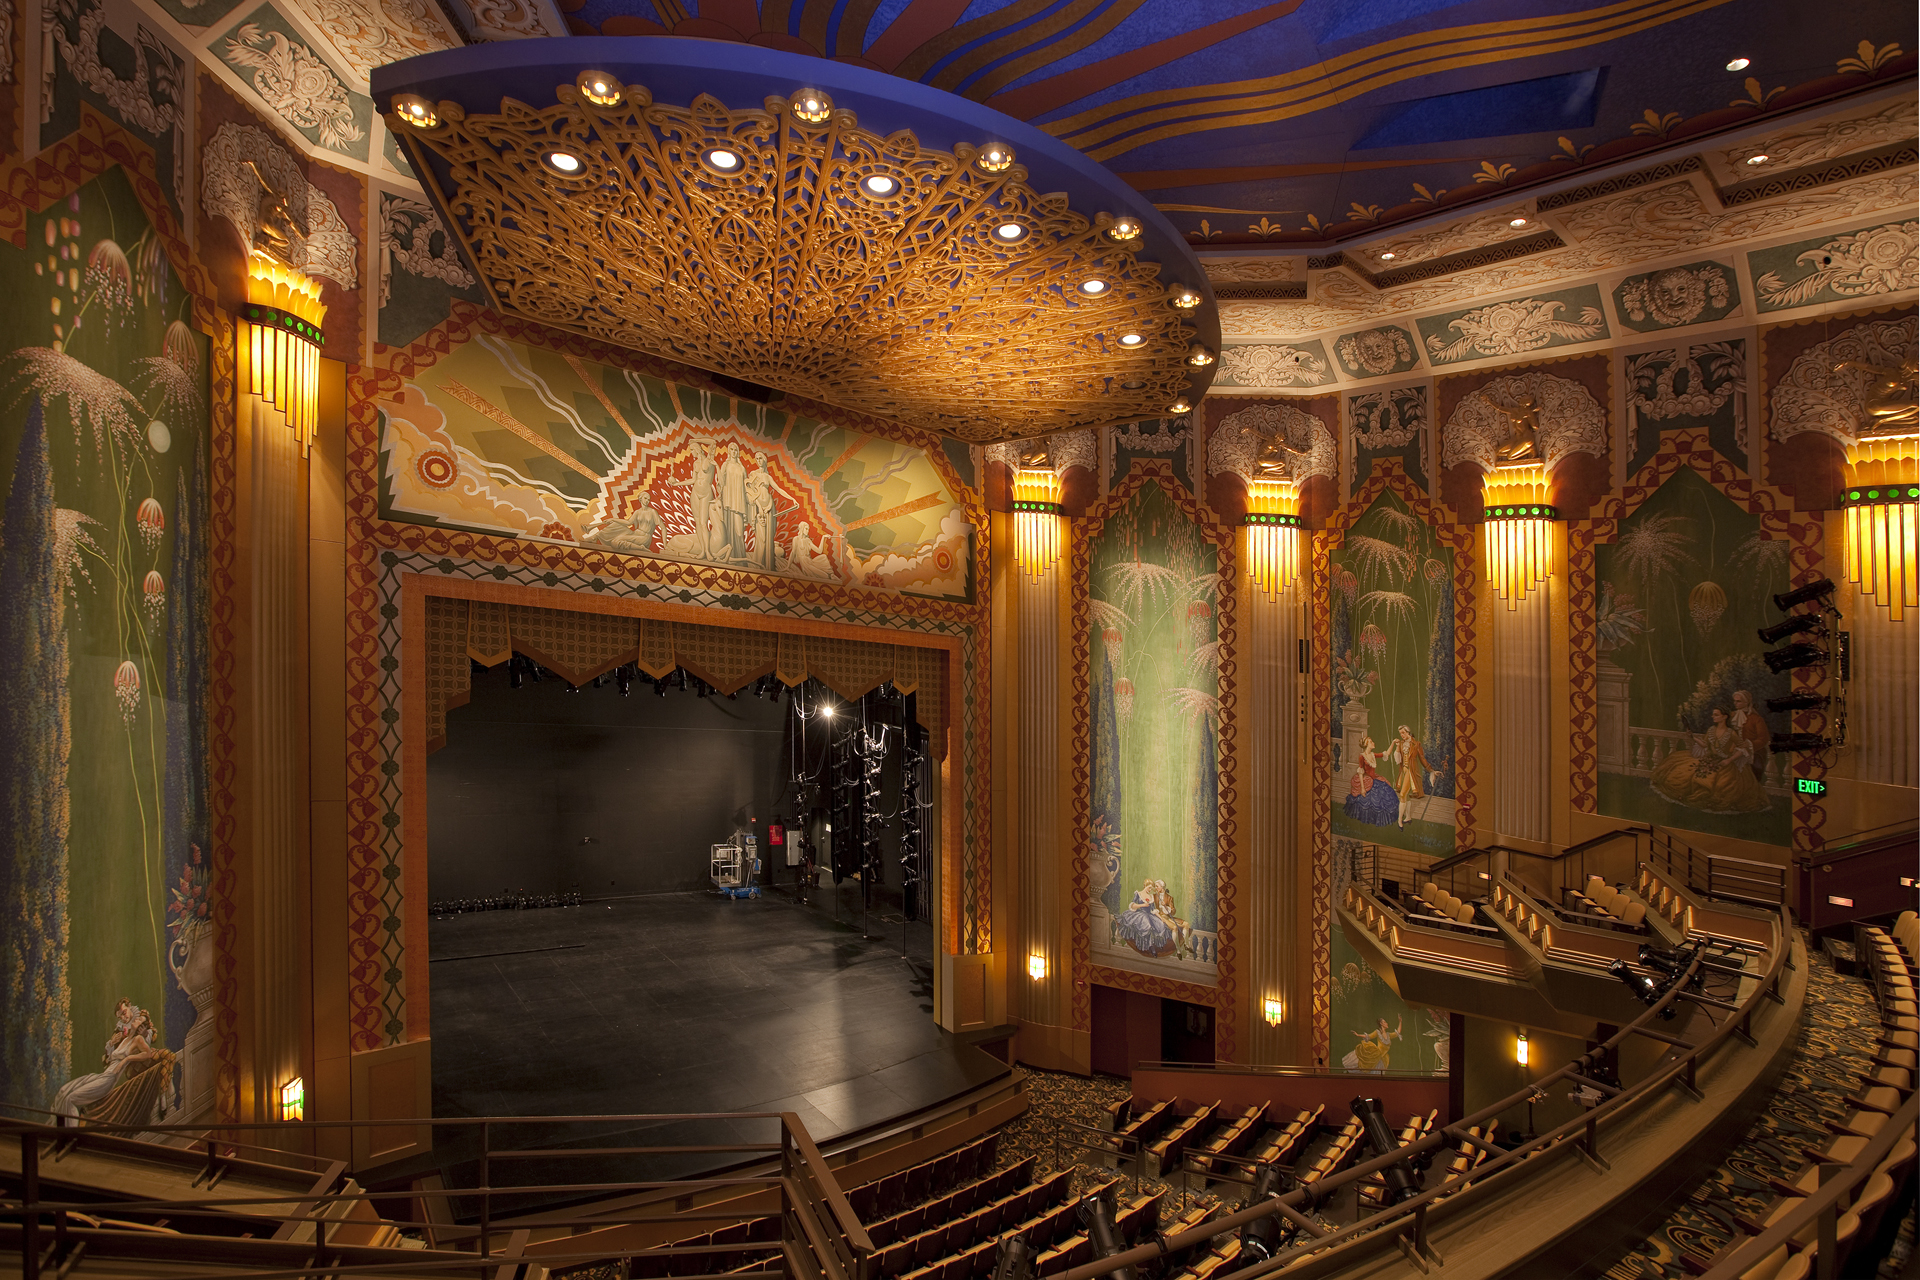 Emerson College – The Paramount Center